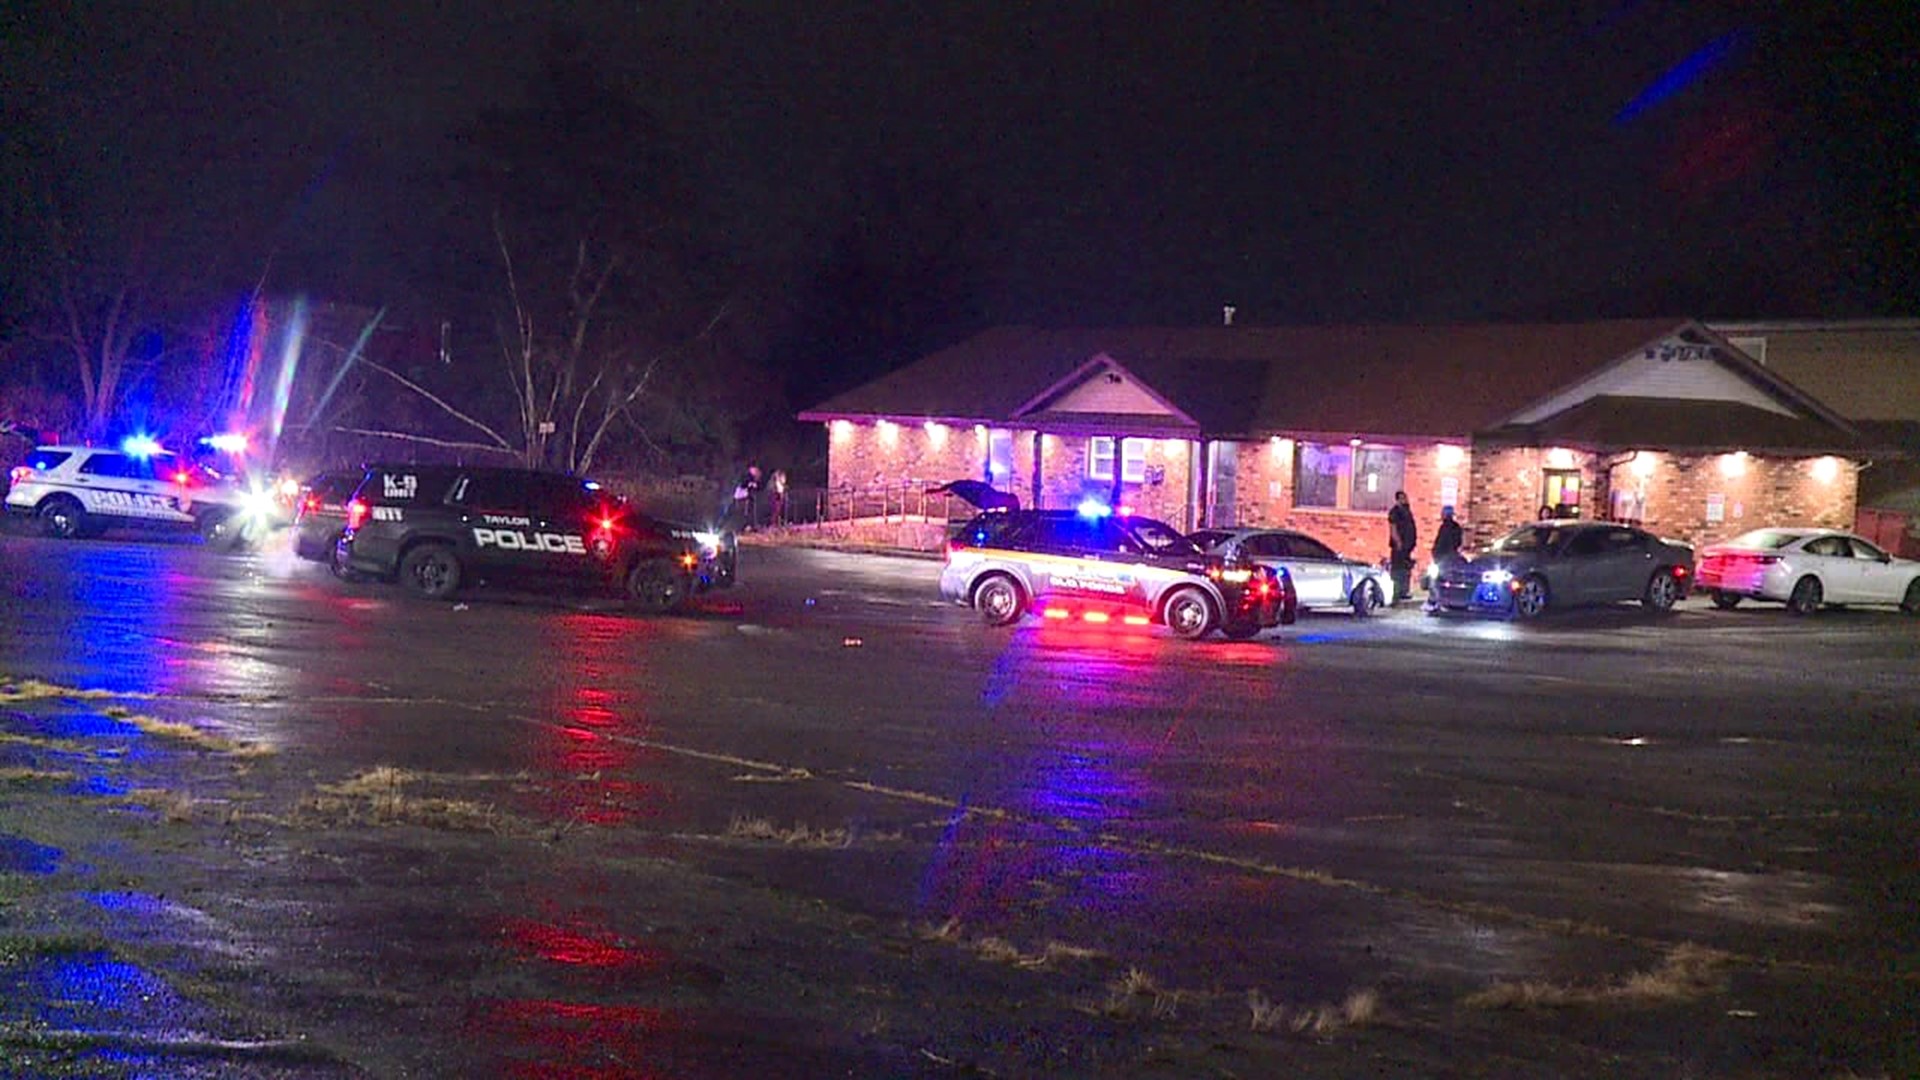 Police responded to the Diamond Club in Old Forge around 3:30 a.m. Sunday.